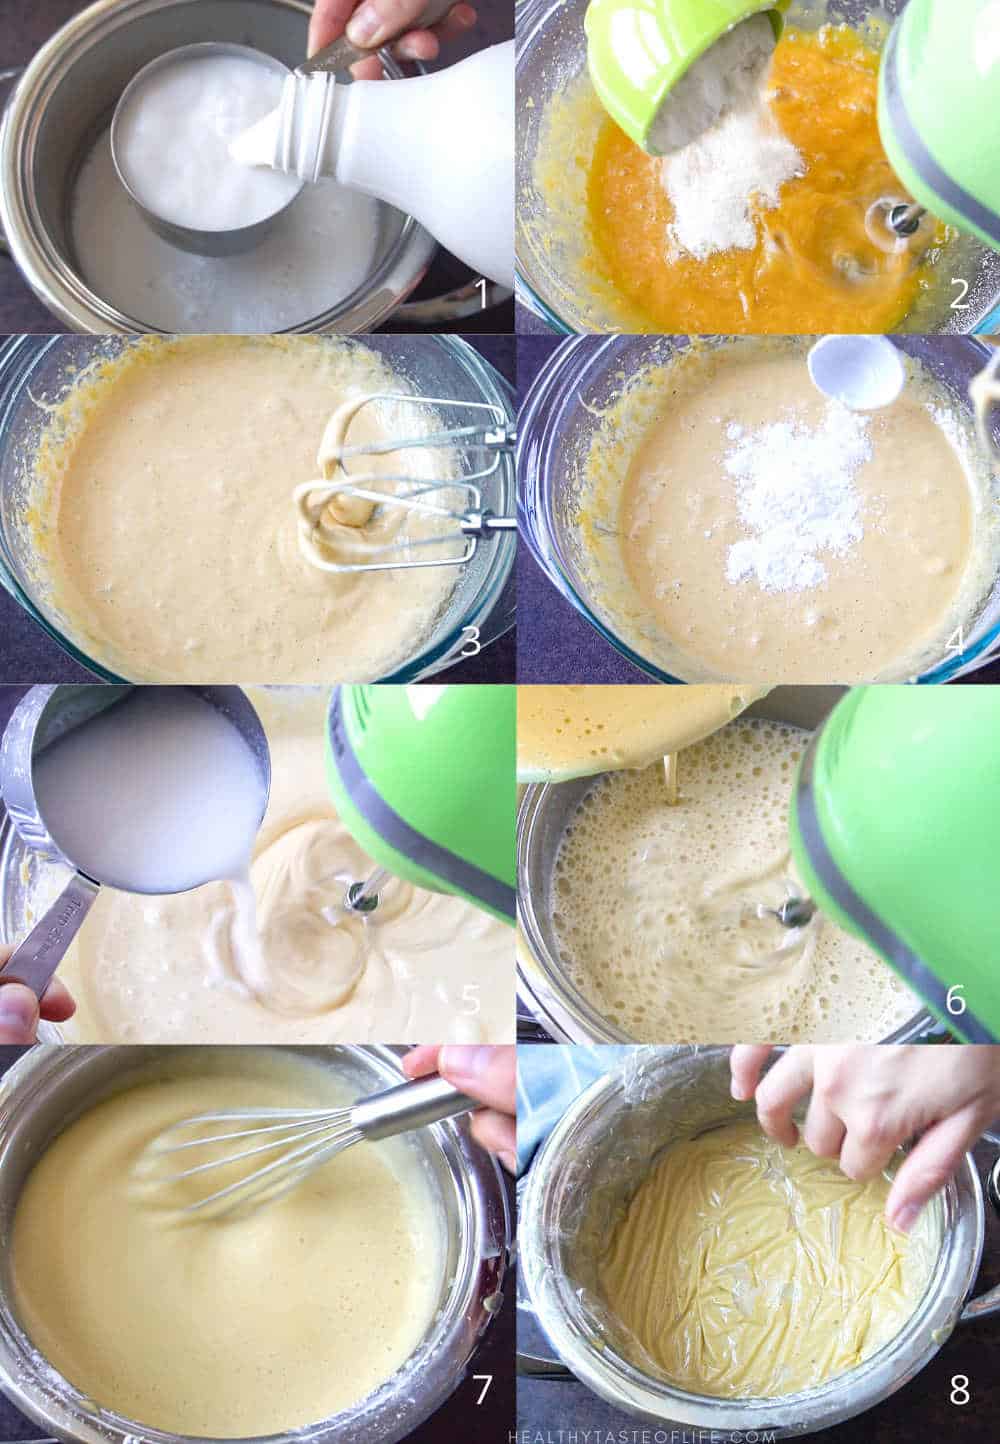 Process shots showing how How to make the dairy free custard for gluten free dairy free banana pudding.